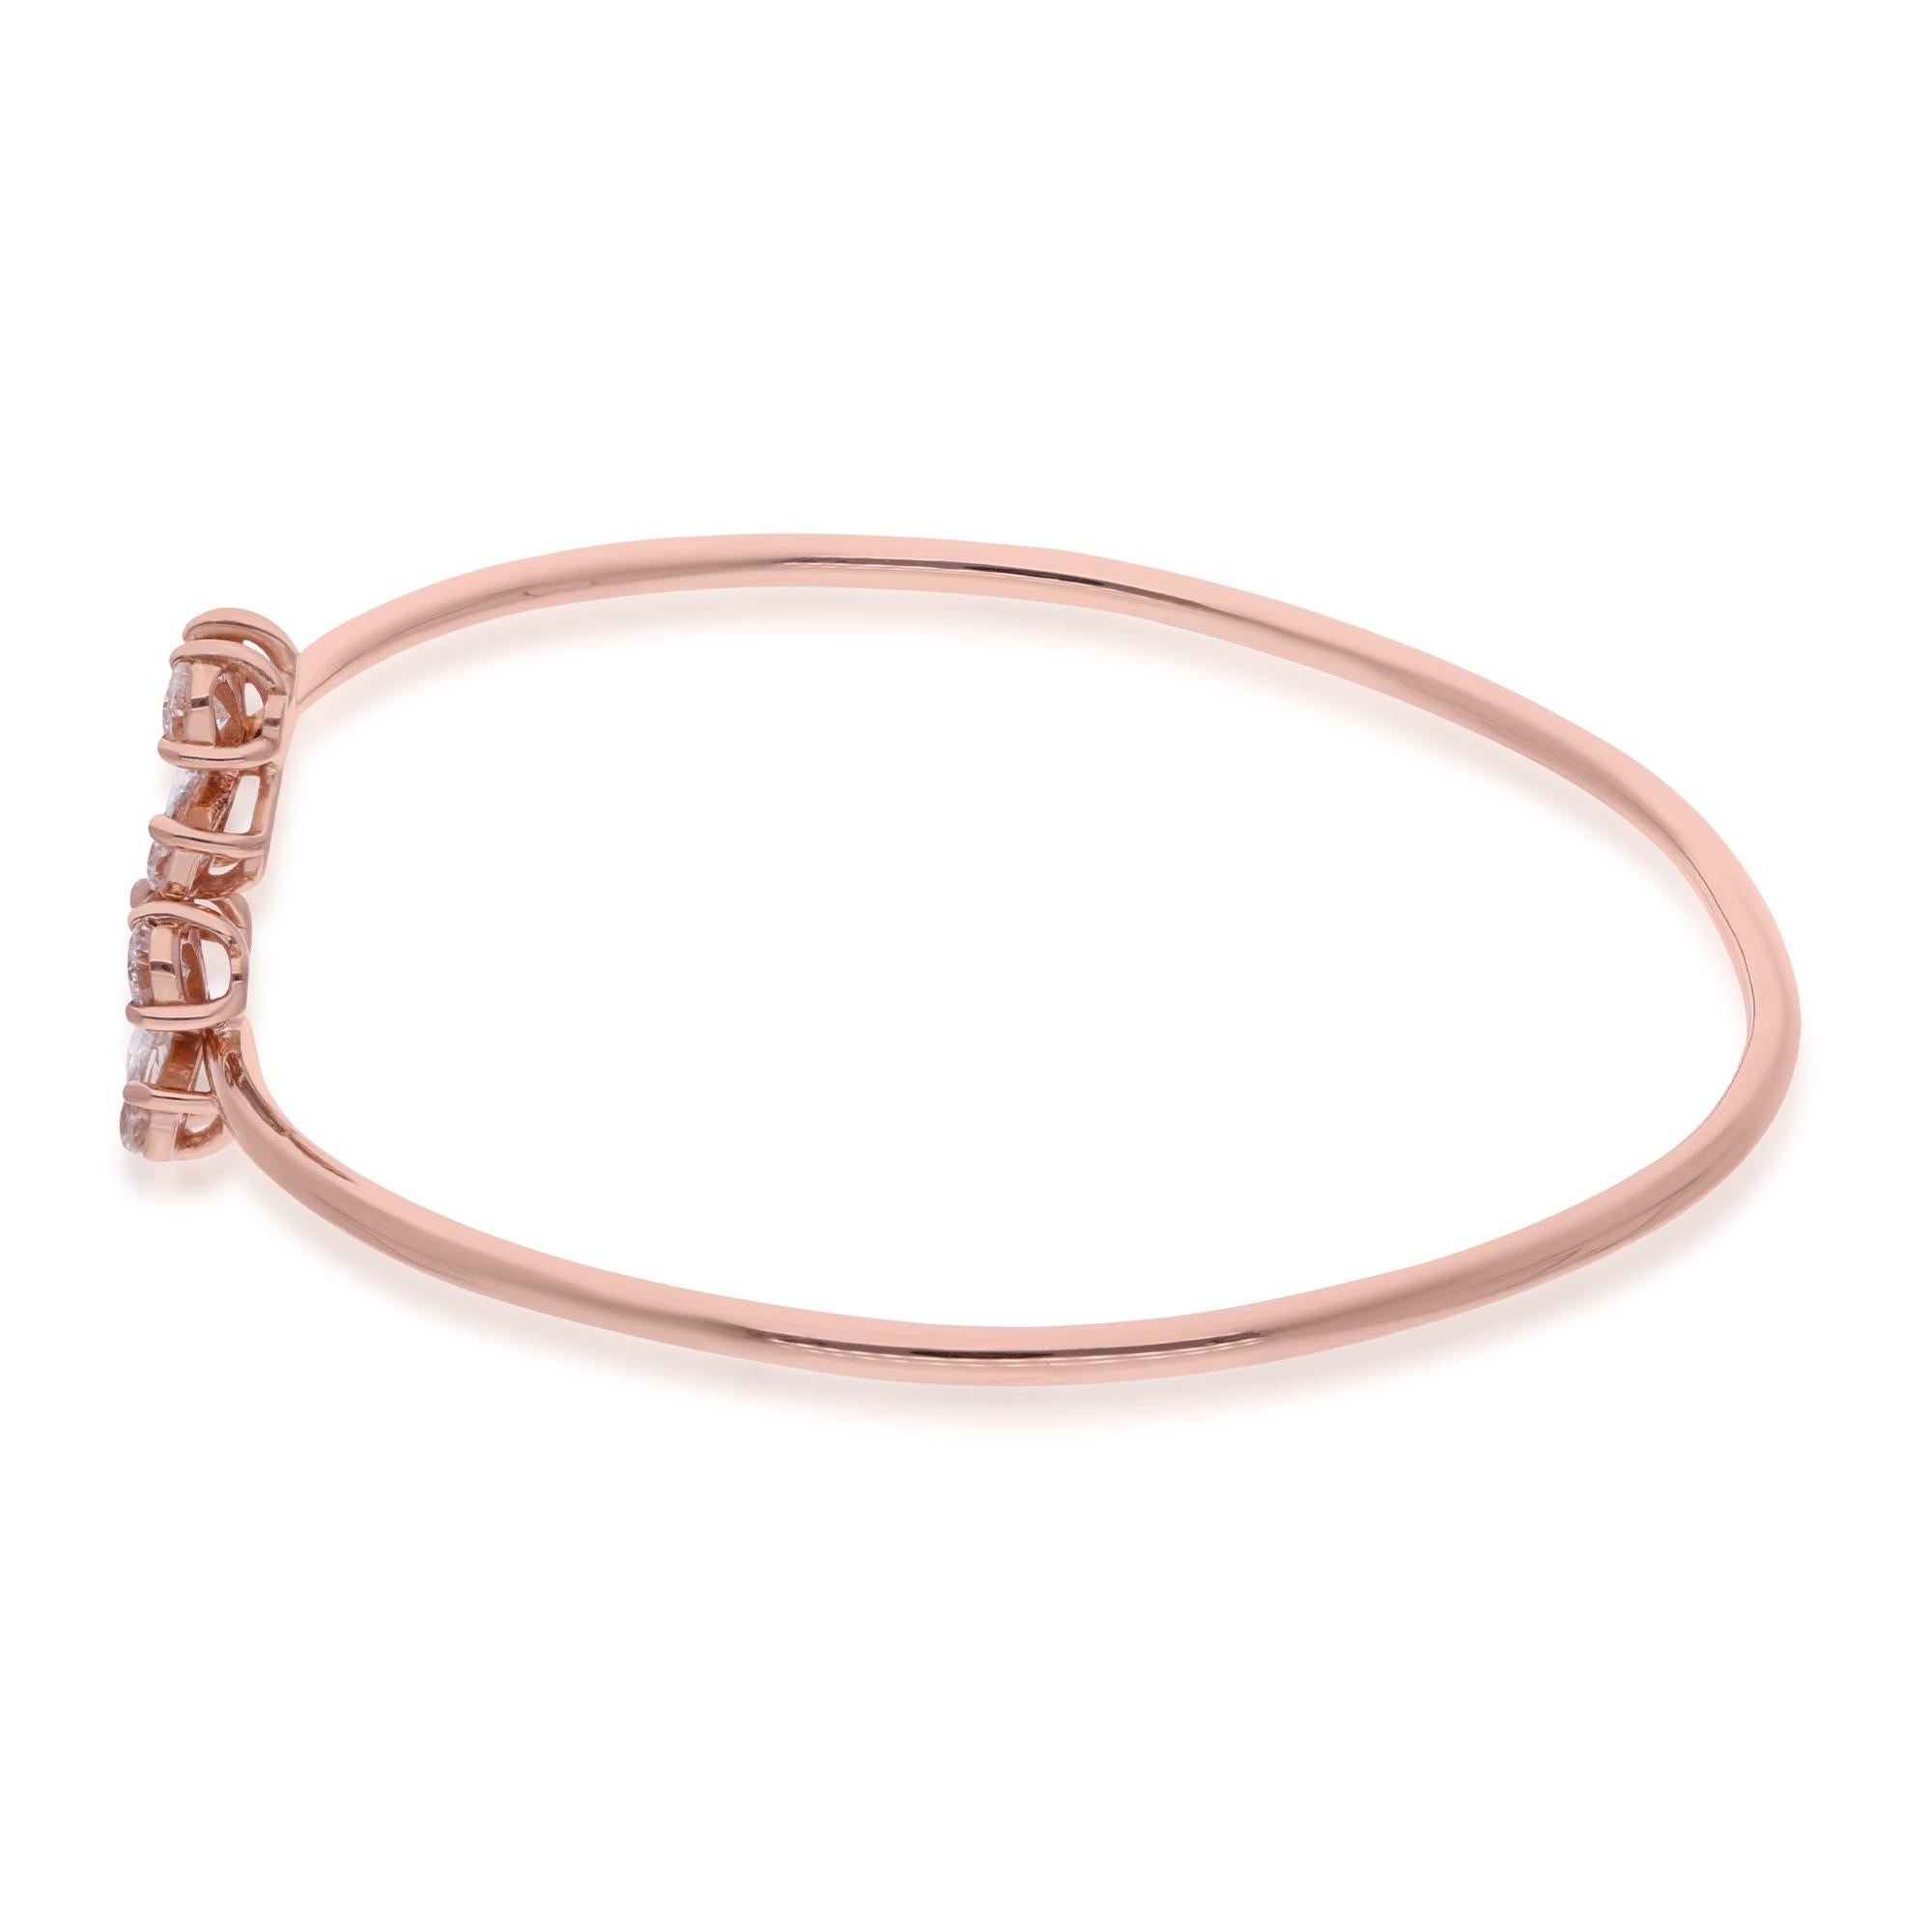 Step into the realm of timeless elegance with this captivating Natural 1.32 Carat Pear Shape Diamond Bangle Bracelet, delicately crafted in 14 Karat Rose Gold. Radiating with refined grace and understated luxury, this exquisite piece of fine jewelry